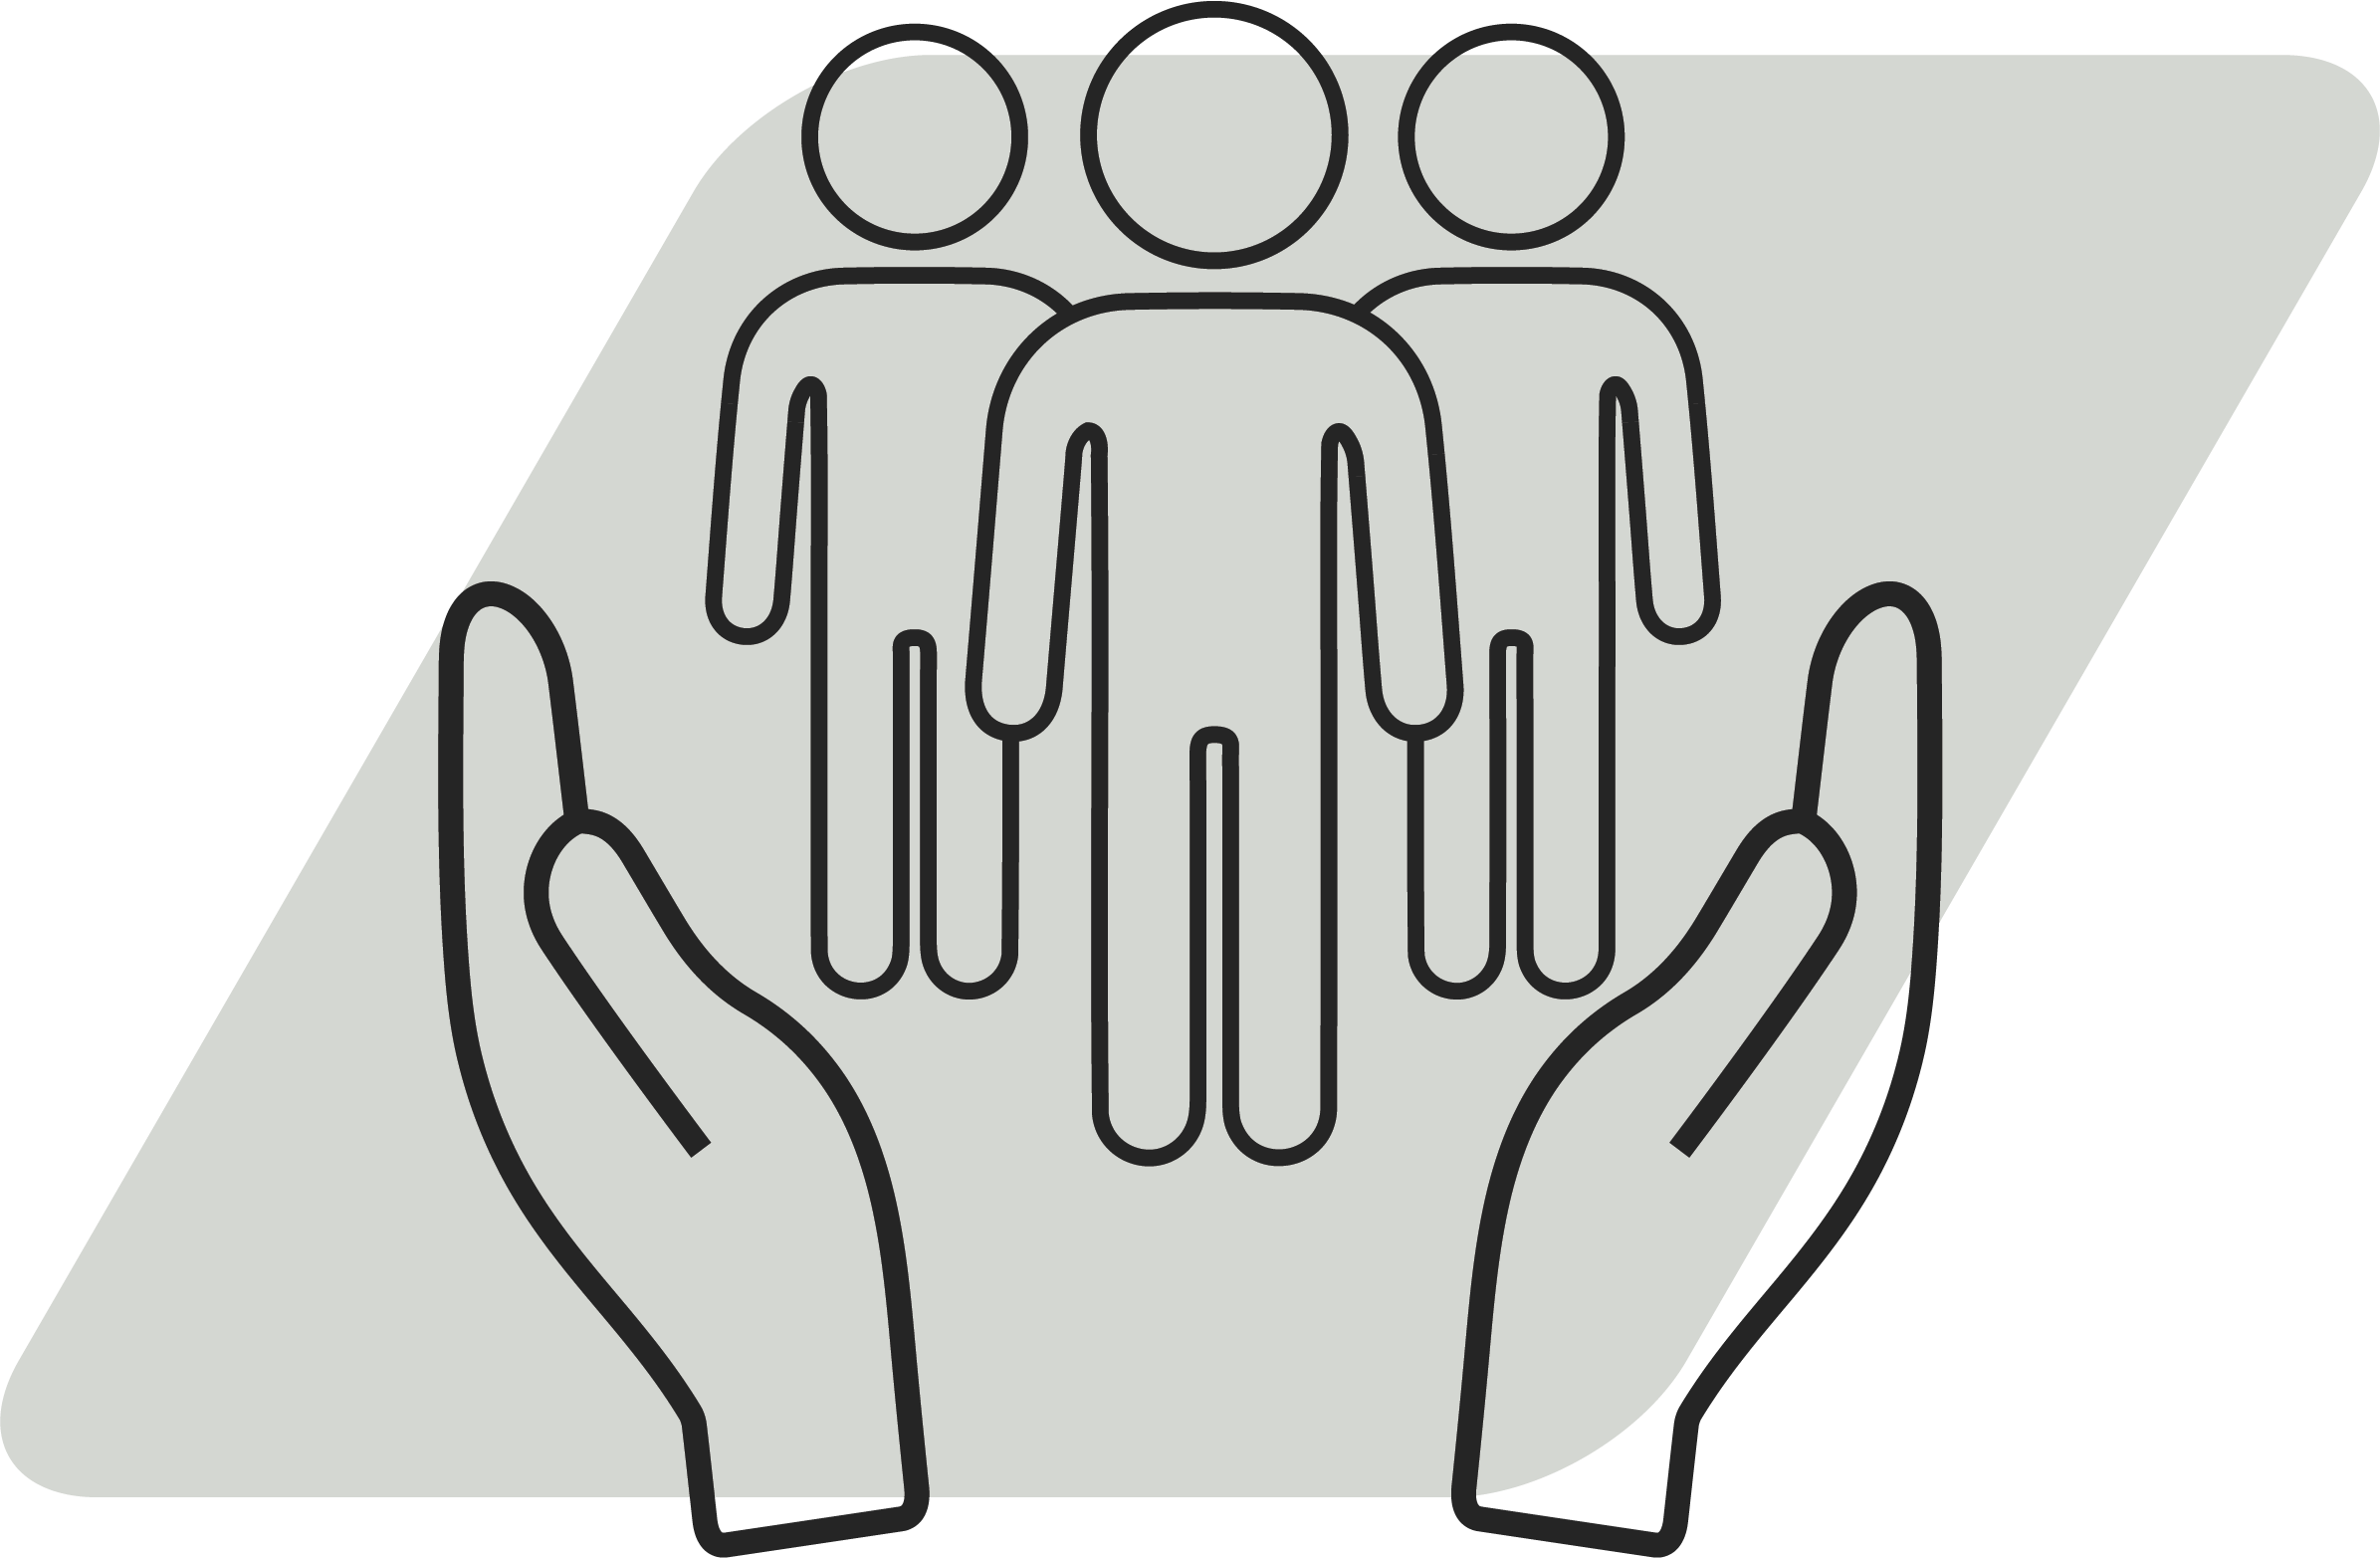 Icon of hands holding 3 people.